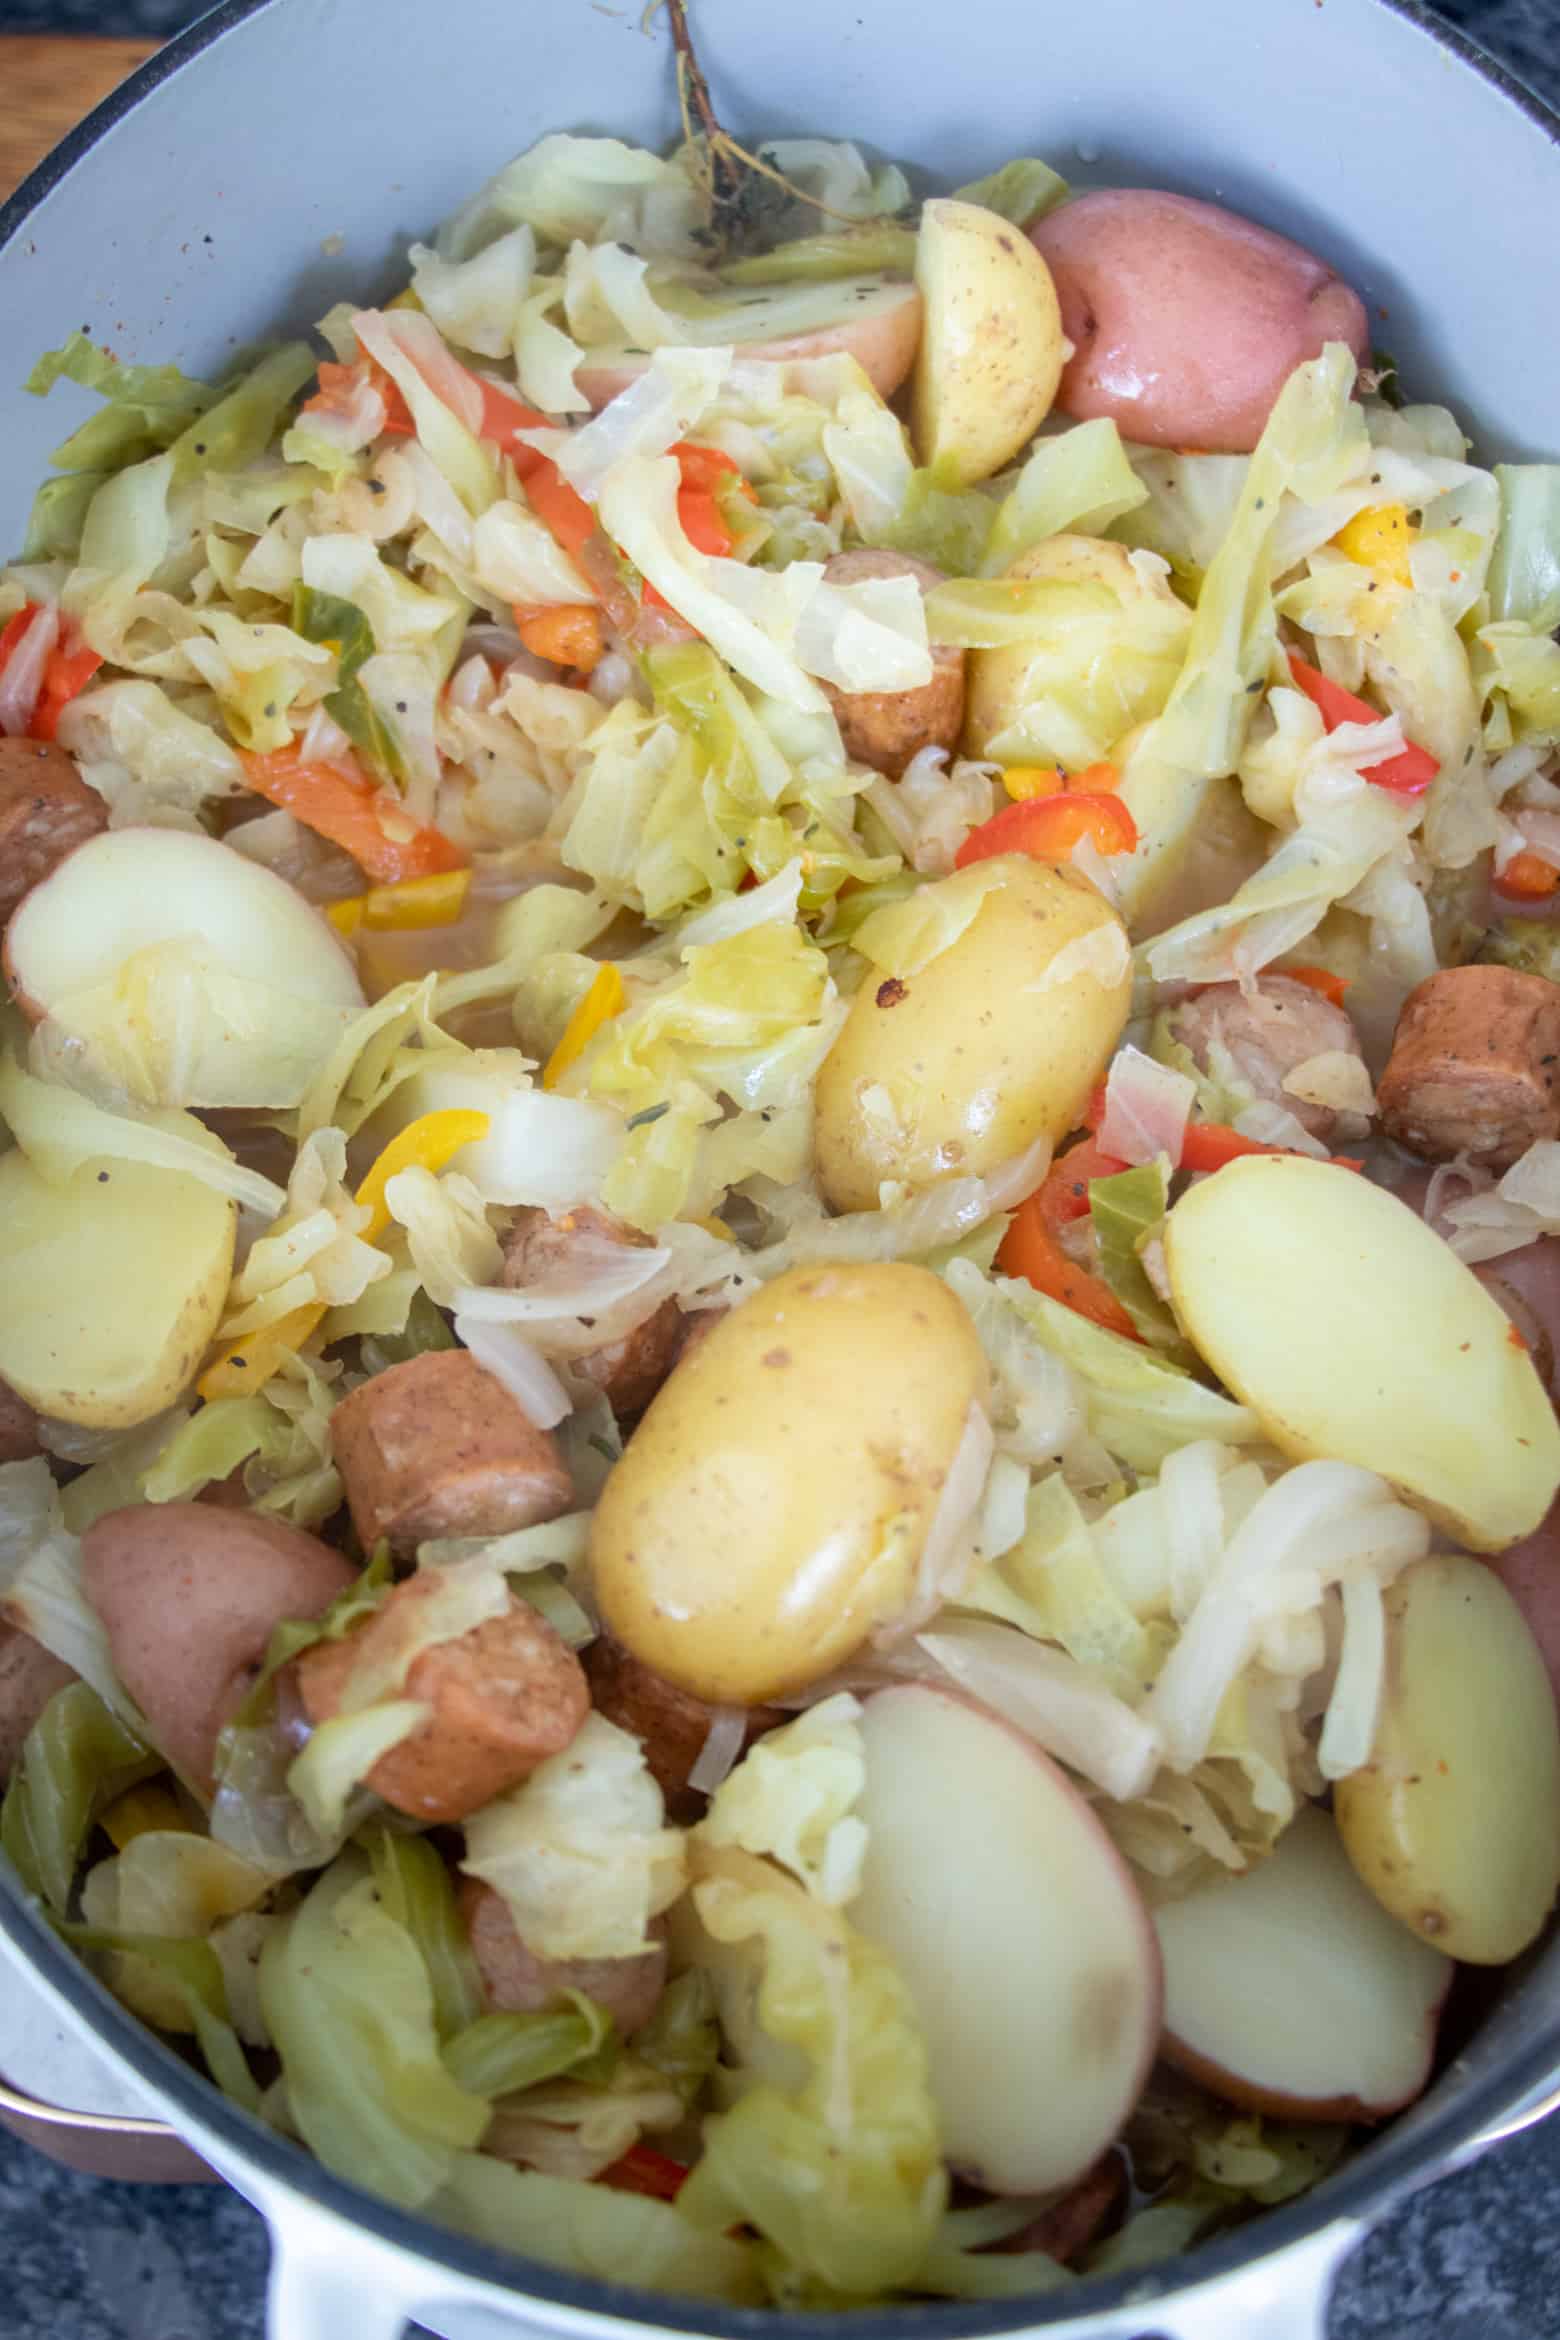 Potatoes added to smothered cabbage